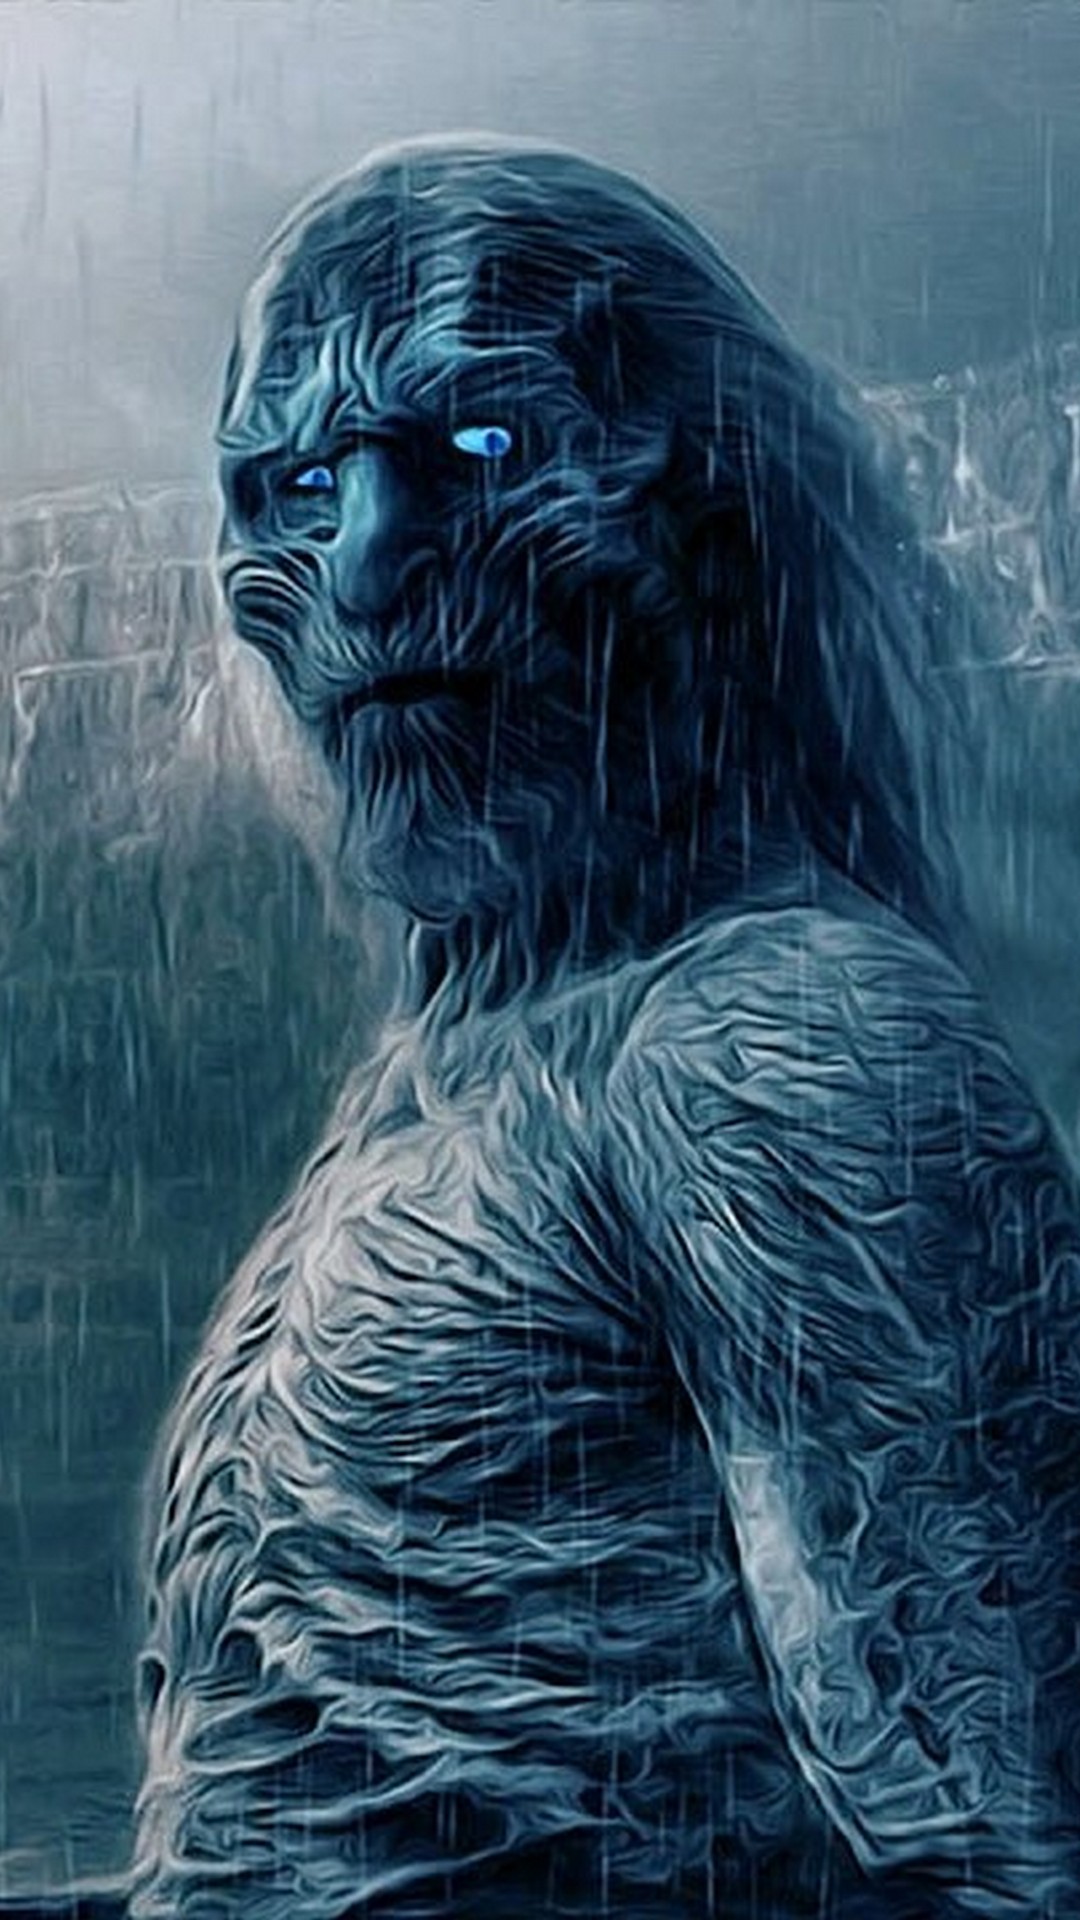 White Walkers Game of Thrones iPhone Wallpaper With high-resolution 1080X1920 pixel. You can use this wallpaper for your iPhone 5, 6, 7, 8, X, XS, XR backgrounds, Mobile Screensaver, or iPad Lock Screen